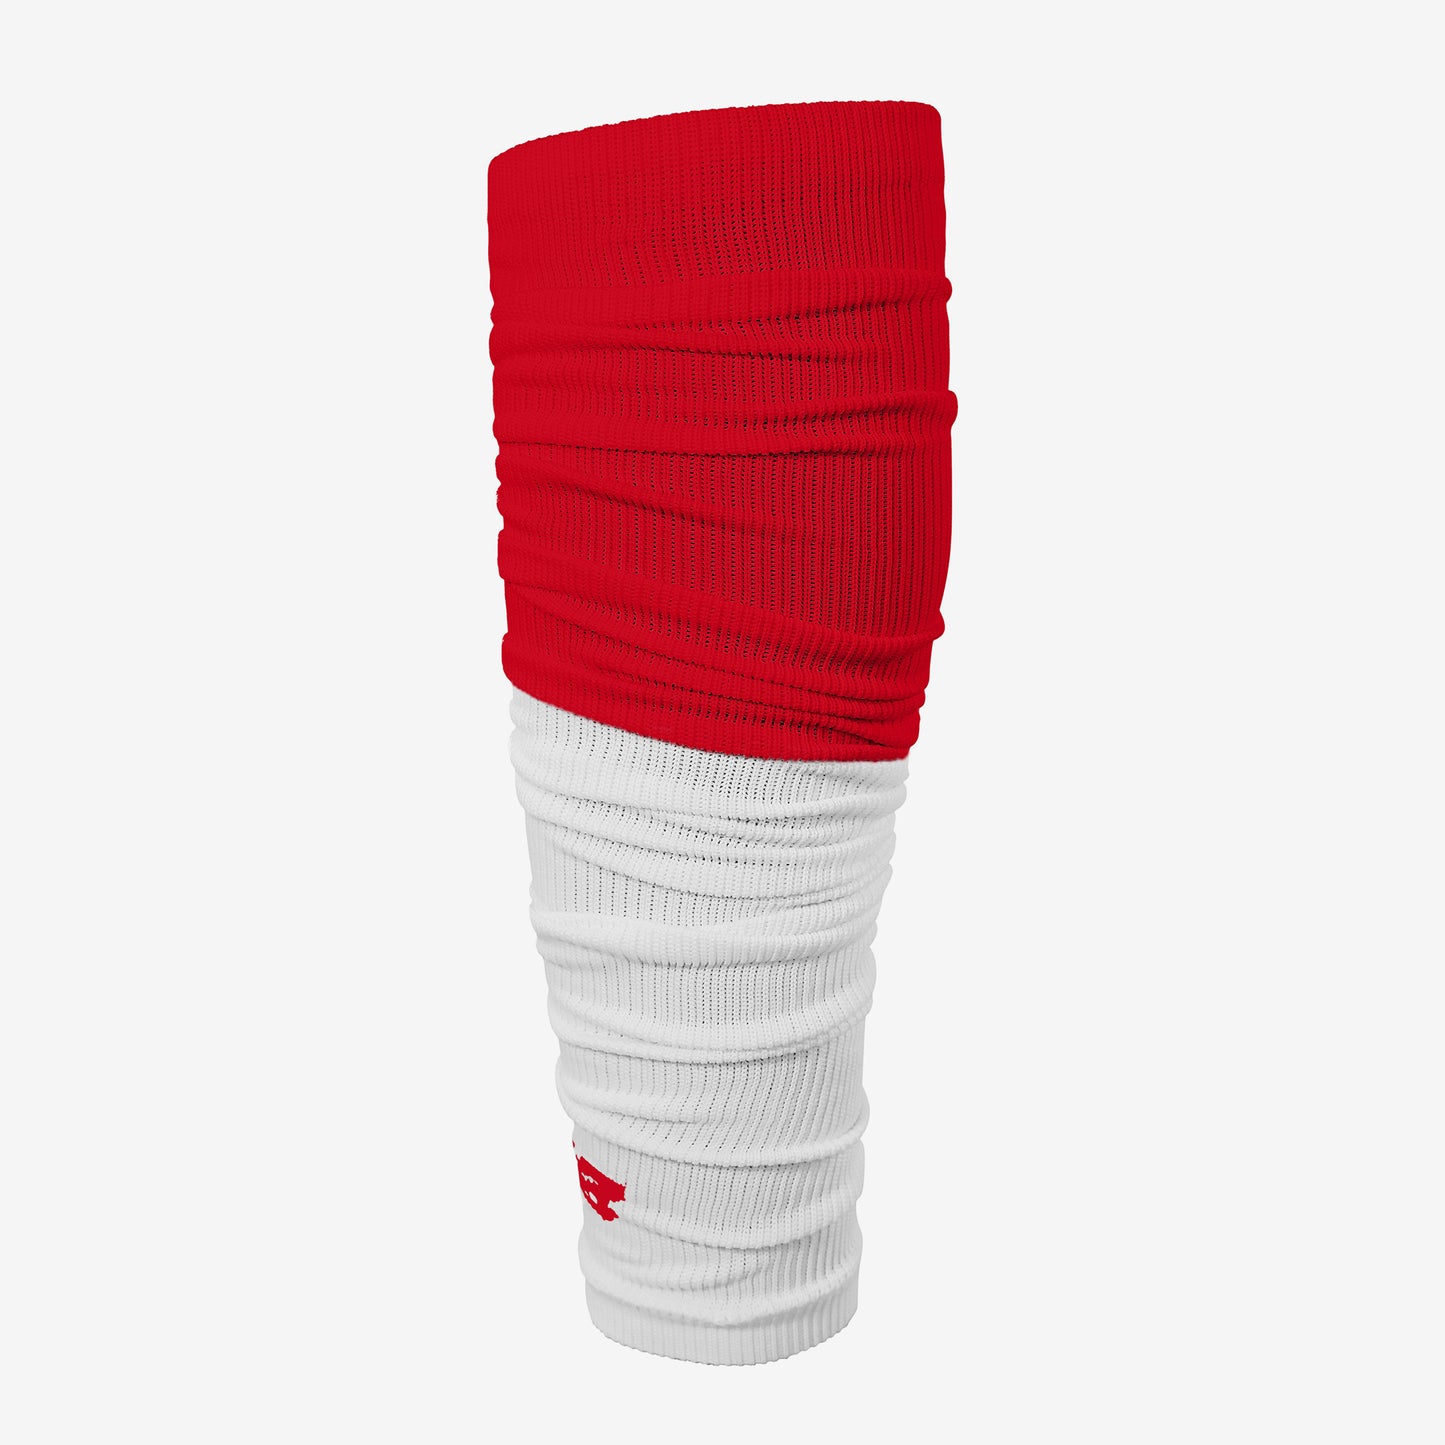 ADULT TWO-TONE FOOTBALL LEG SLEEVES 2.0 (RED/WHITE)